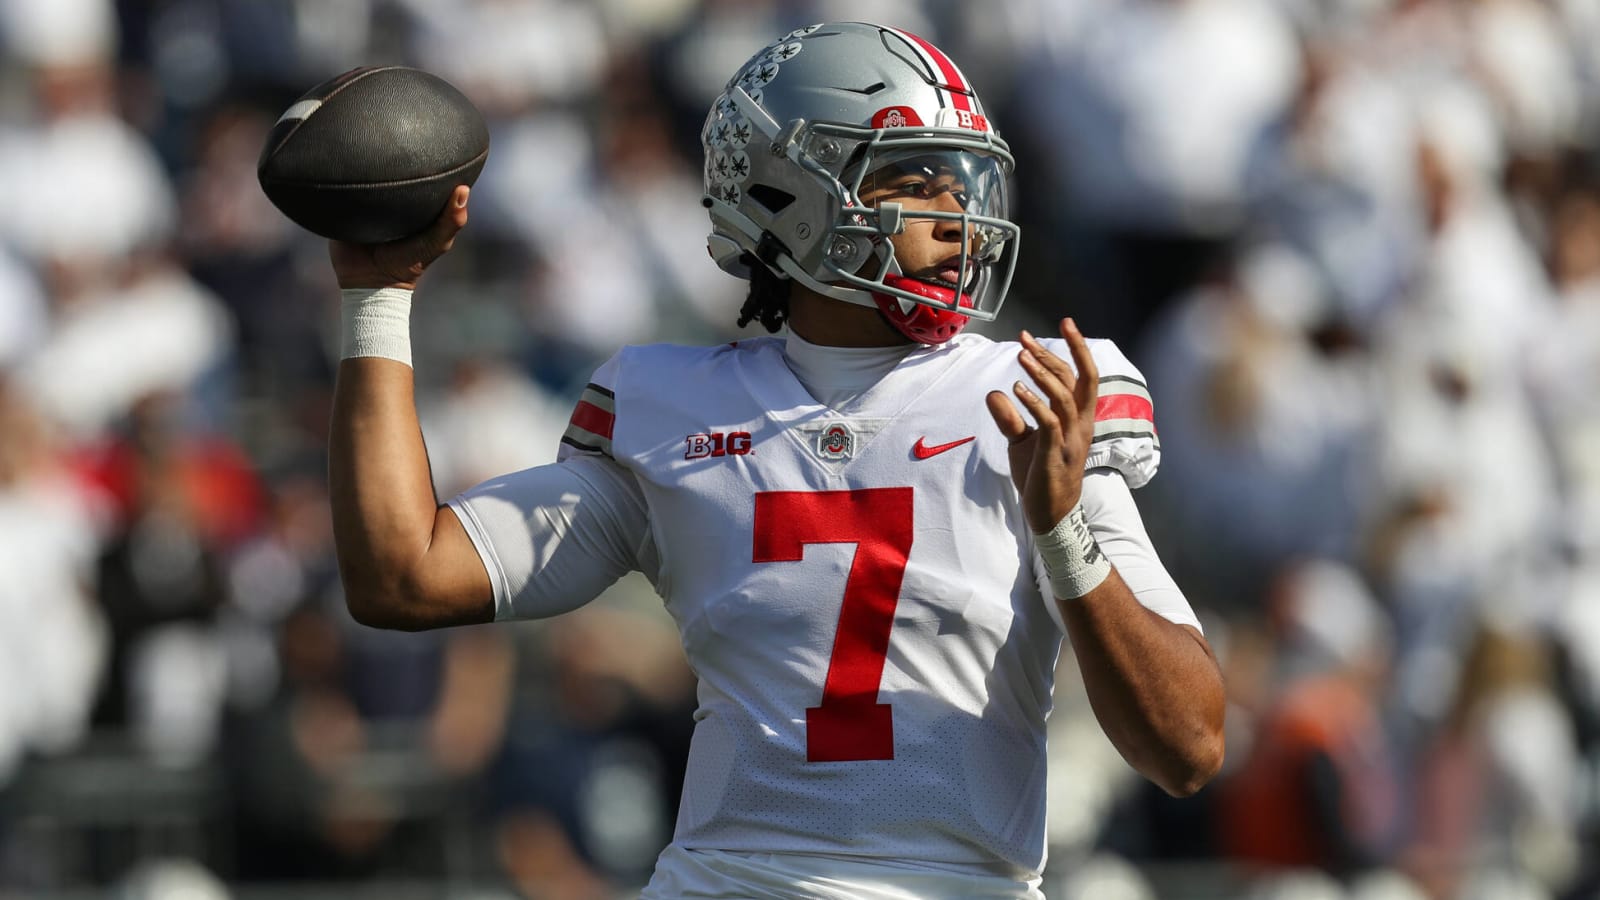 Surveying potential landing spots for top QBs in draft